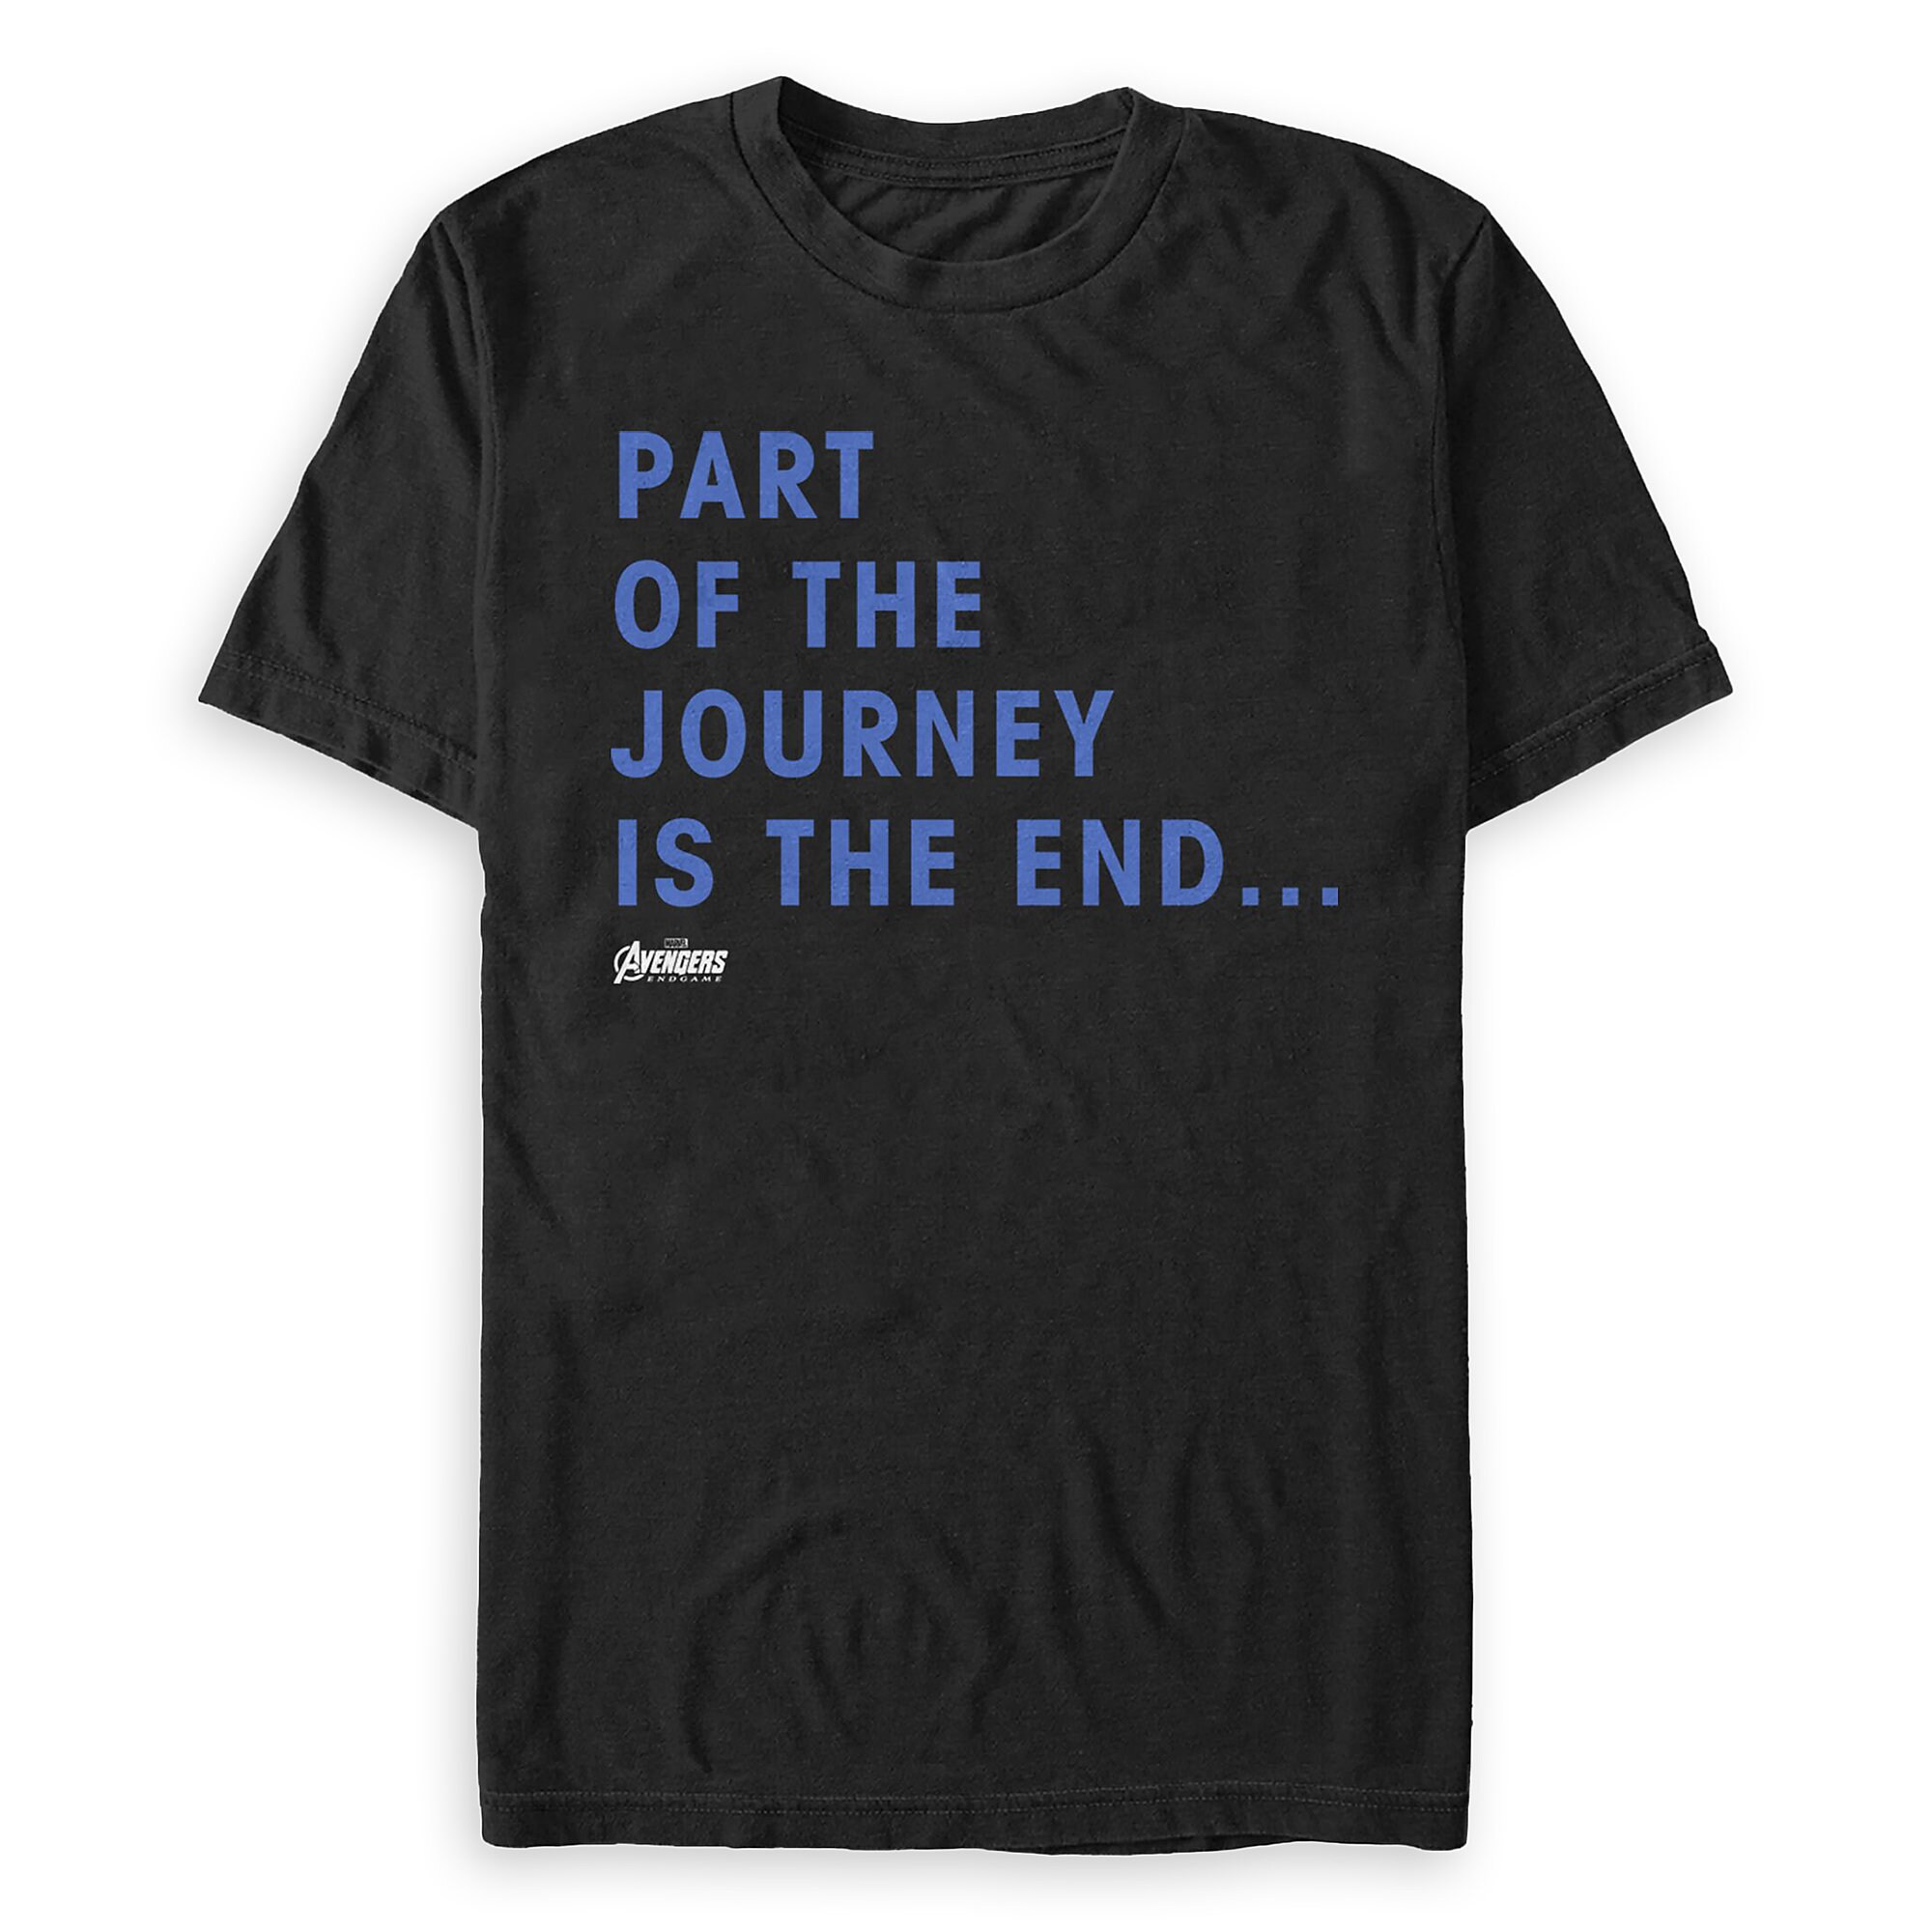 Marvel's Avengers: Endgame Quote T-Shirt for Adults